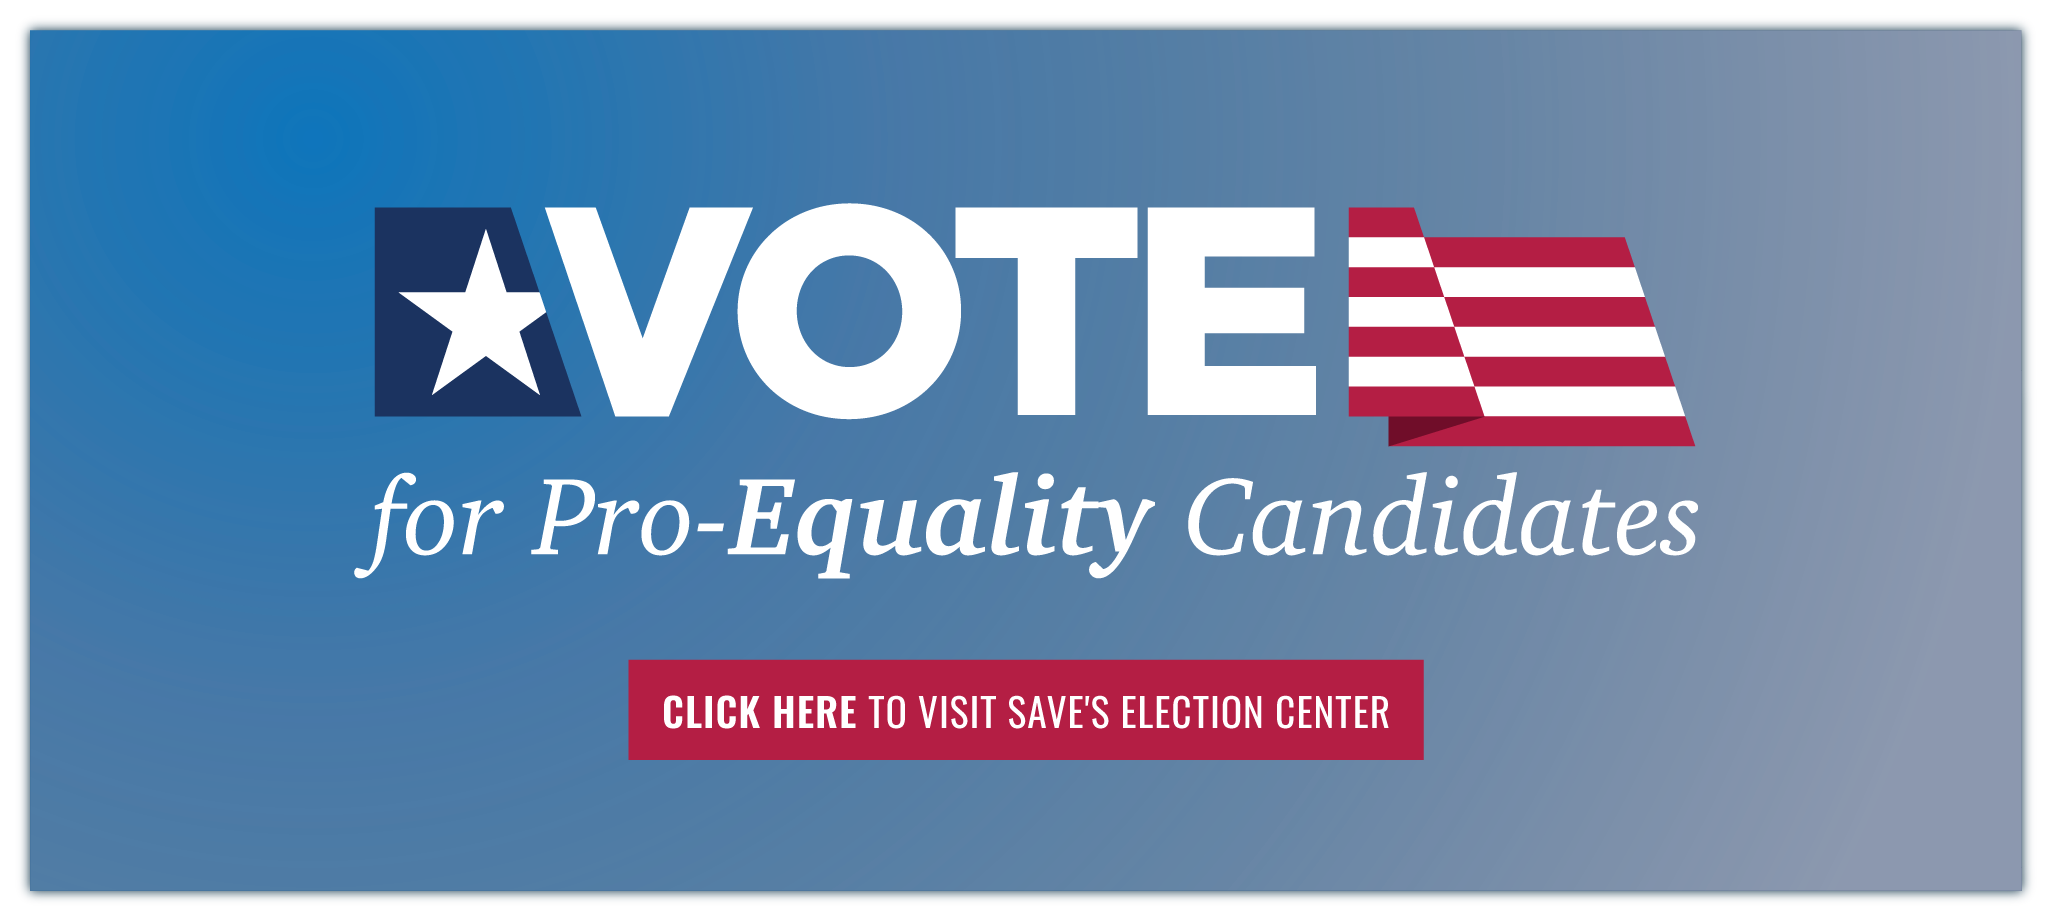 Vote for Pro-Equality Candidates